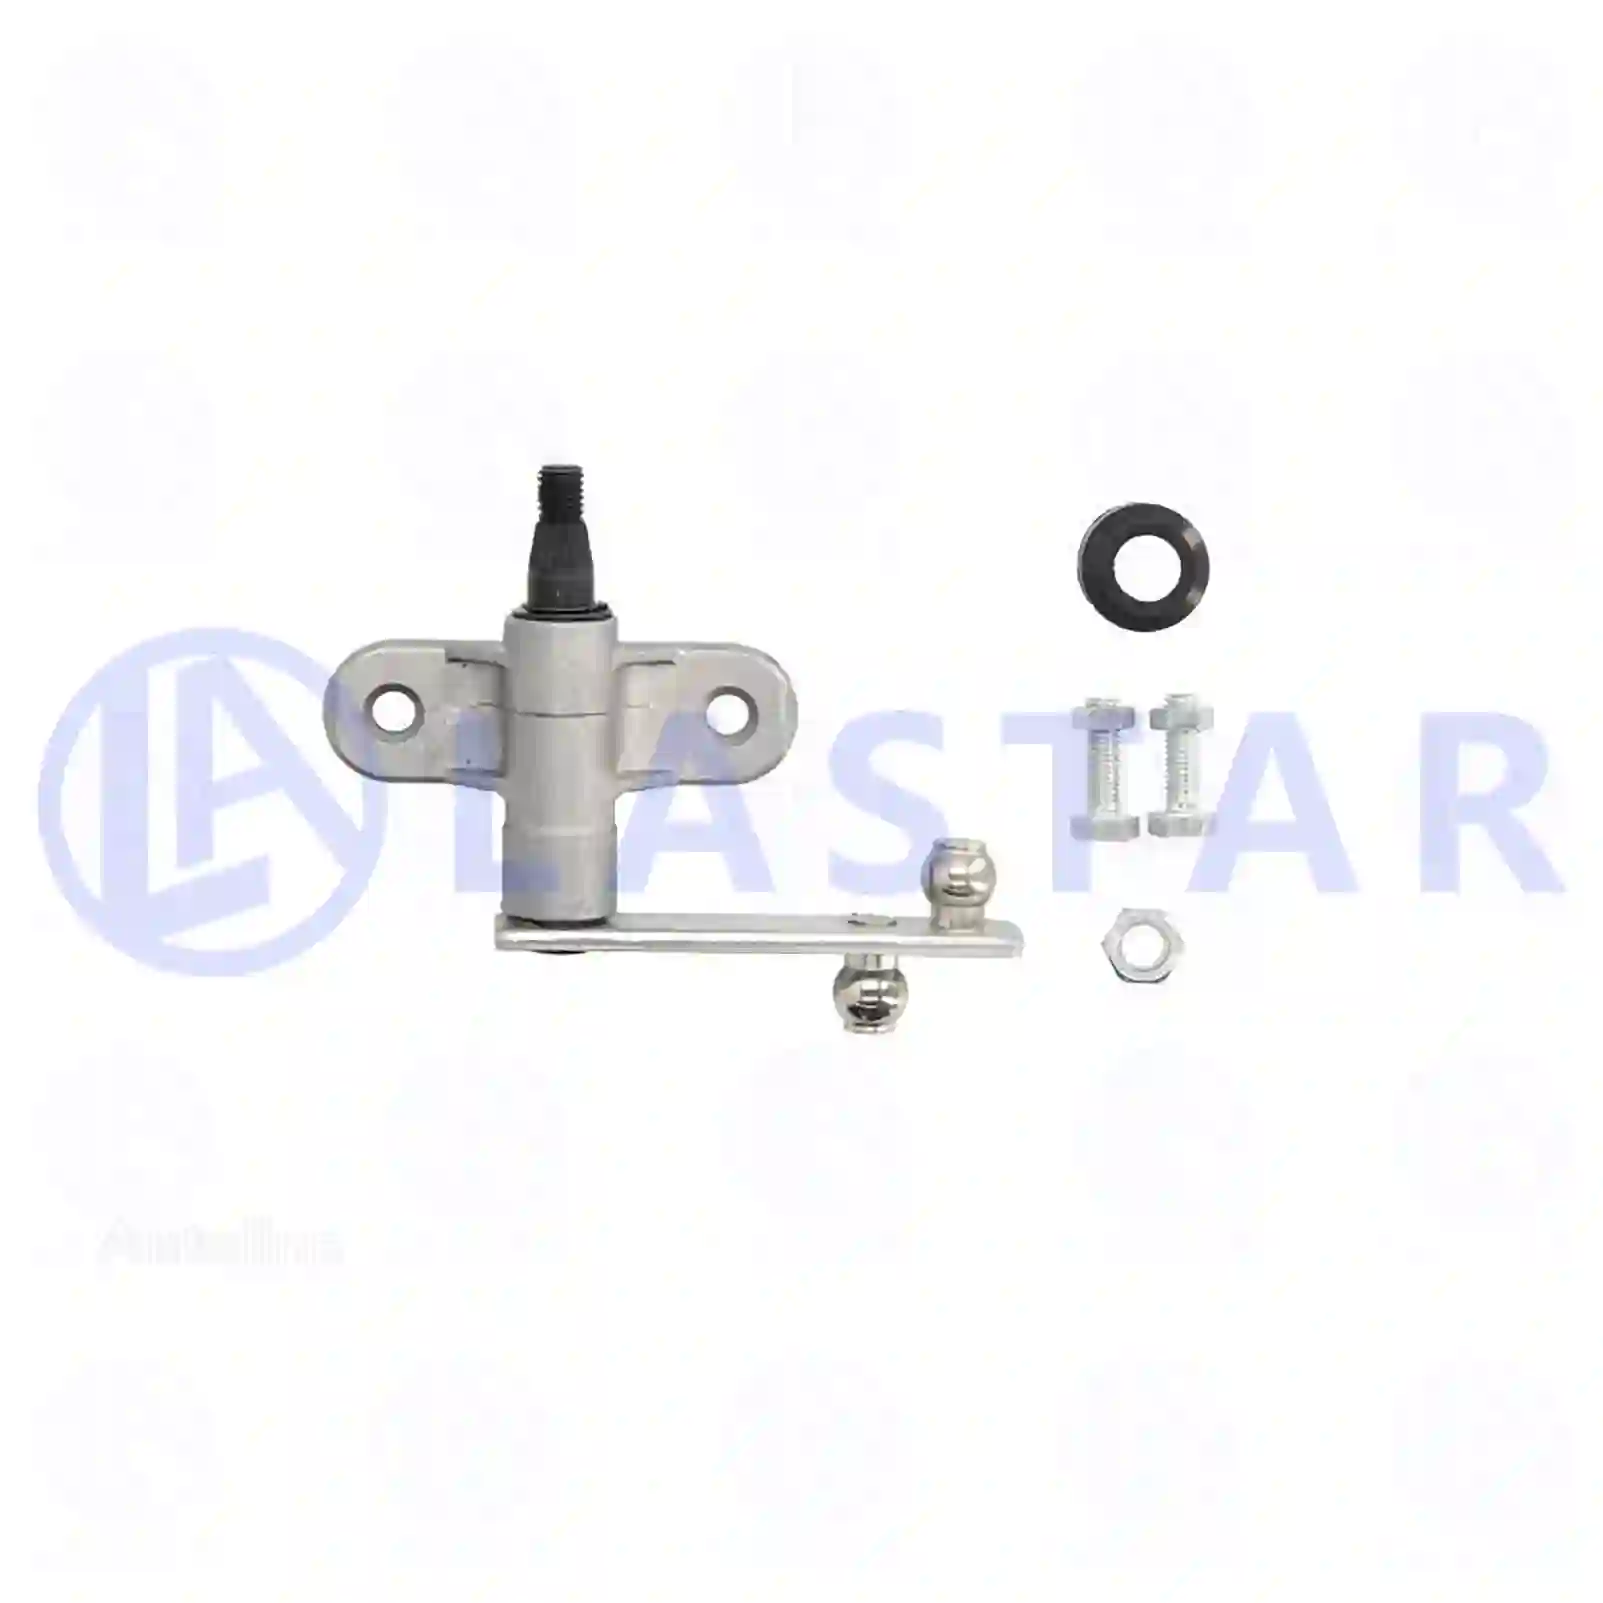 Wiper arm bearing, 77721639, 1337957, 1525891, 525891, ZG21291-0008 ||  77721639 Lastar Spare Part | Truck Spare Parts, Auotomotive Spare Parts Wiper arm bearing, 77721639, 1337957, 1525891, 525891, ZG21291-0008 ||  77721639 Lastar Spare Part | Truck Spare Parts, Auotomotive Spare Parts